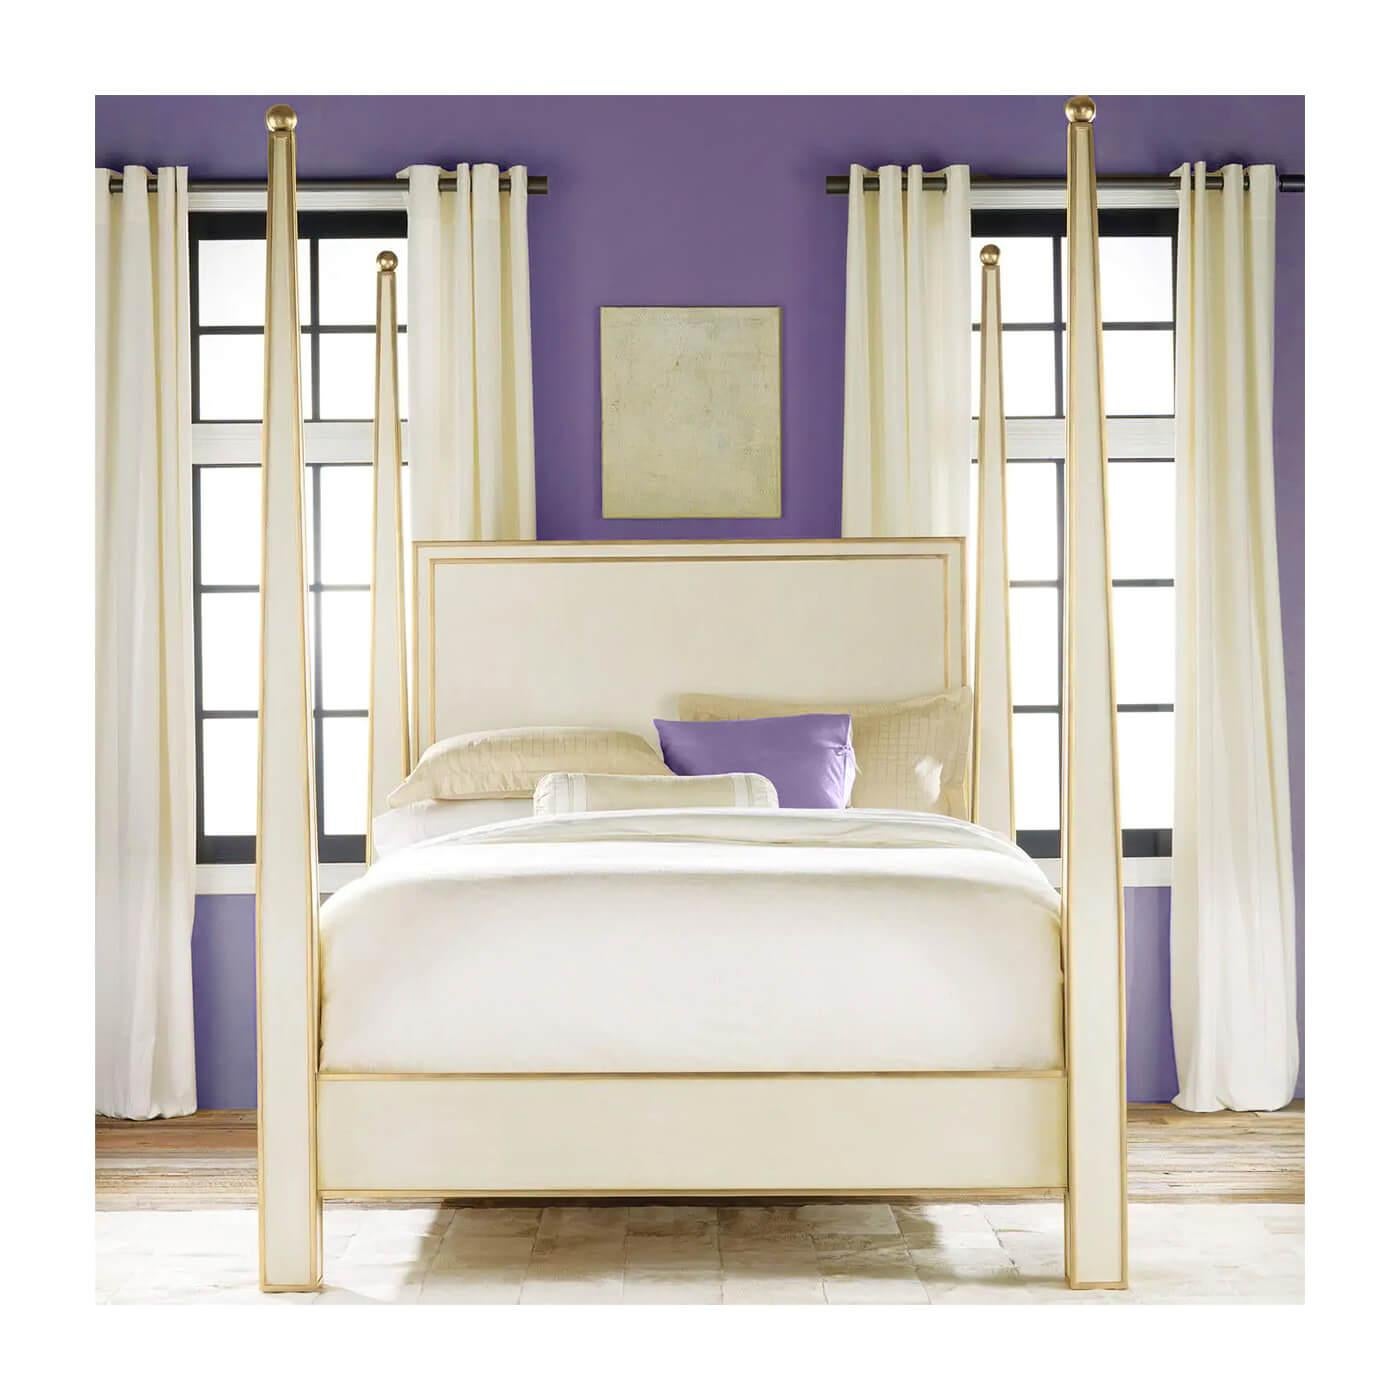 A Modern Gustavian Cream Painted Four Poster Bed. A wonderful combination of antique Gustavian design and modern details. The posters are in a tapered pyramidal form with gilded trim and ball finials. The antique grey-painted headboard and frame